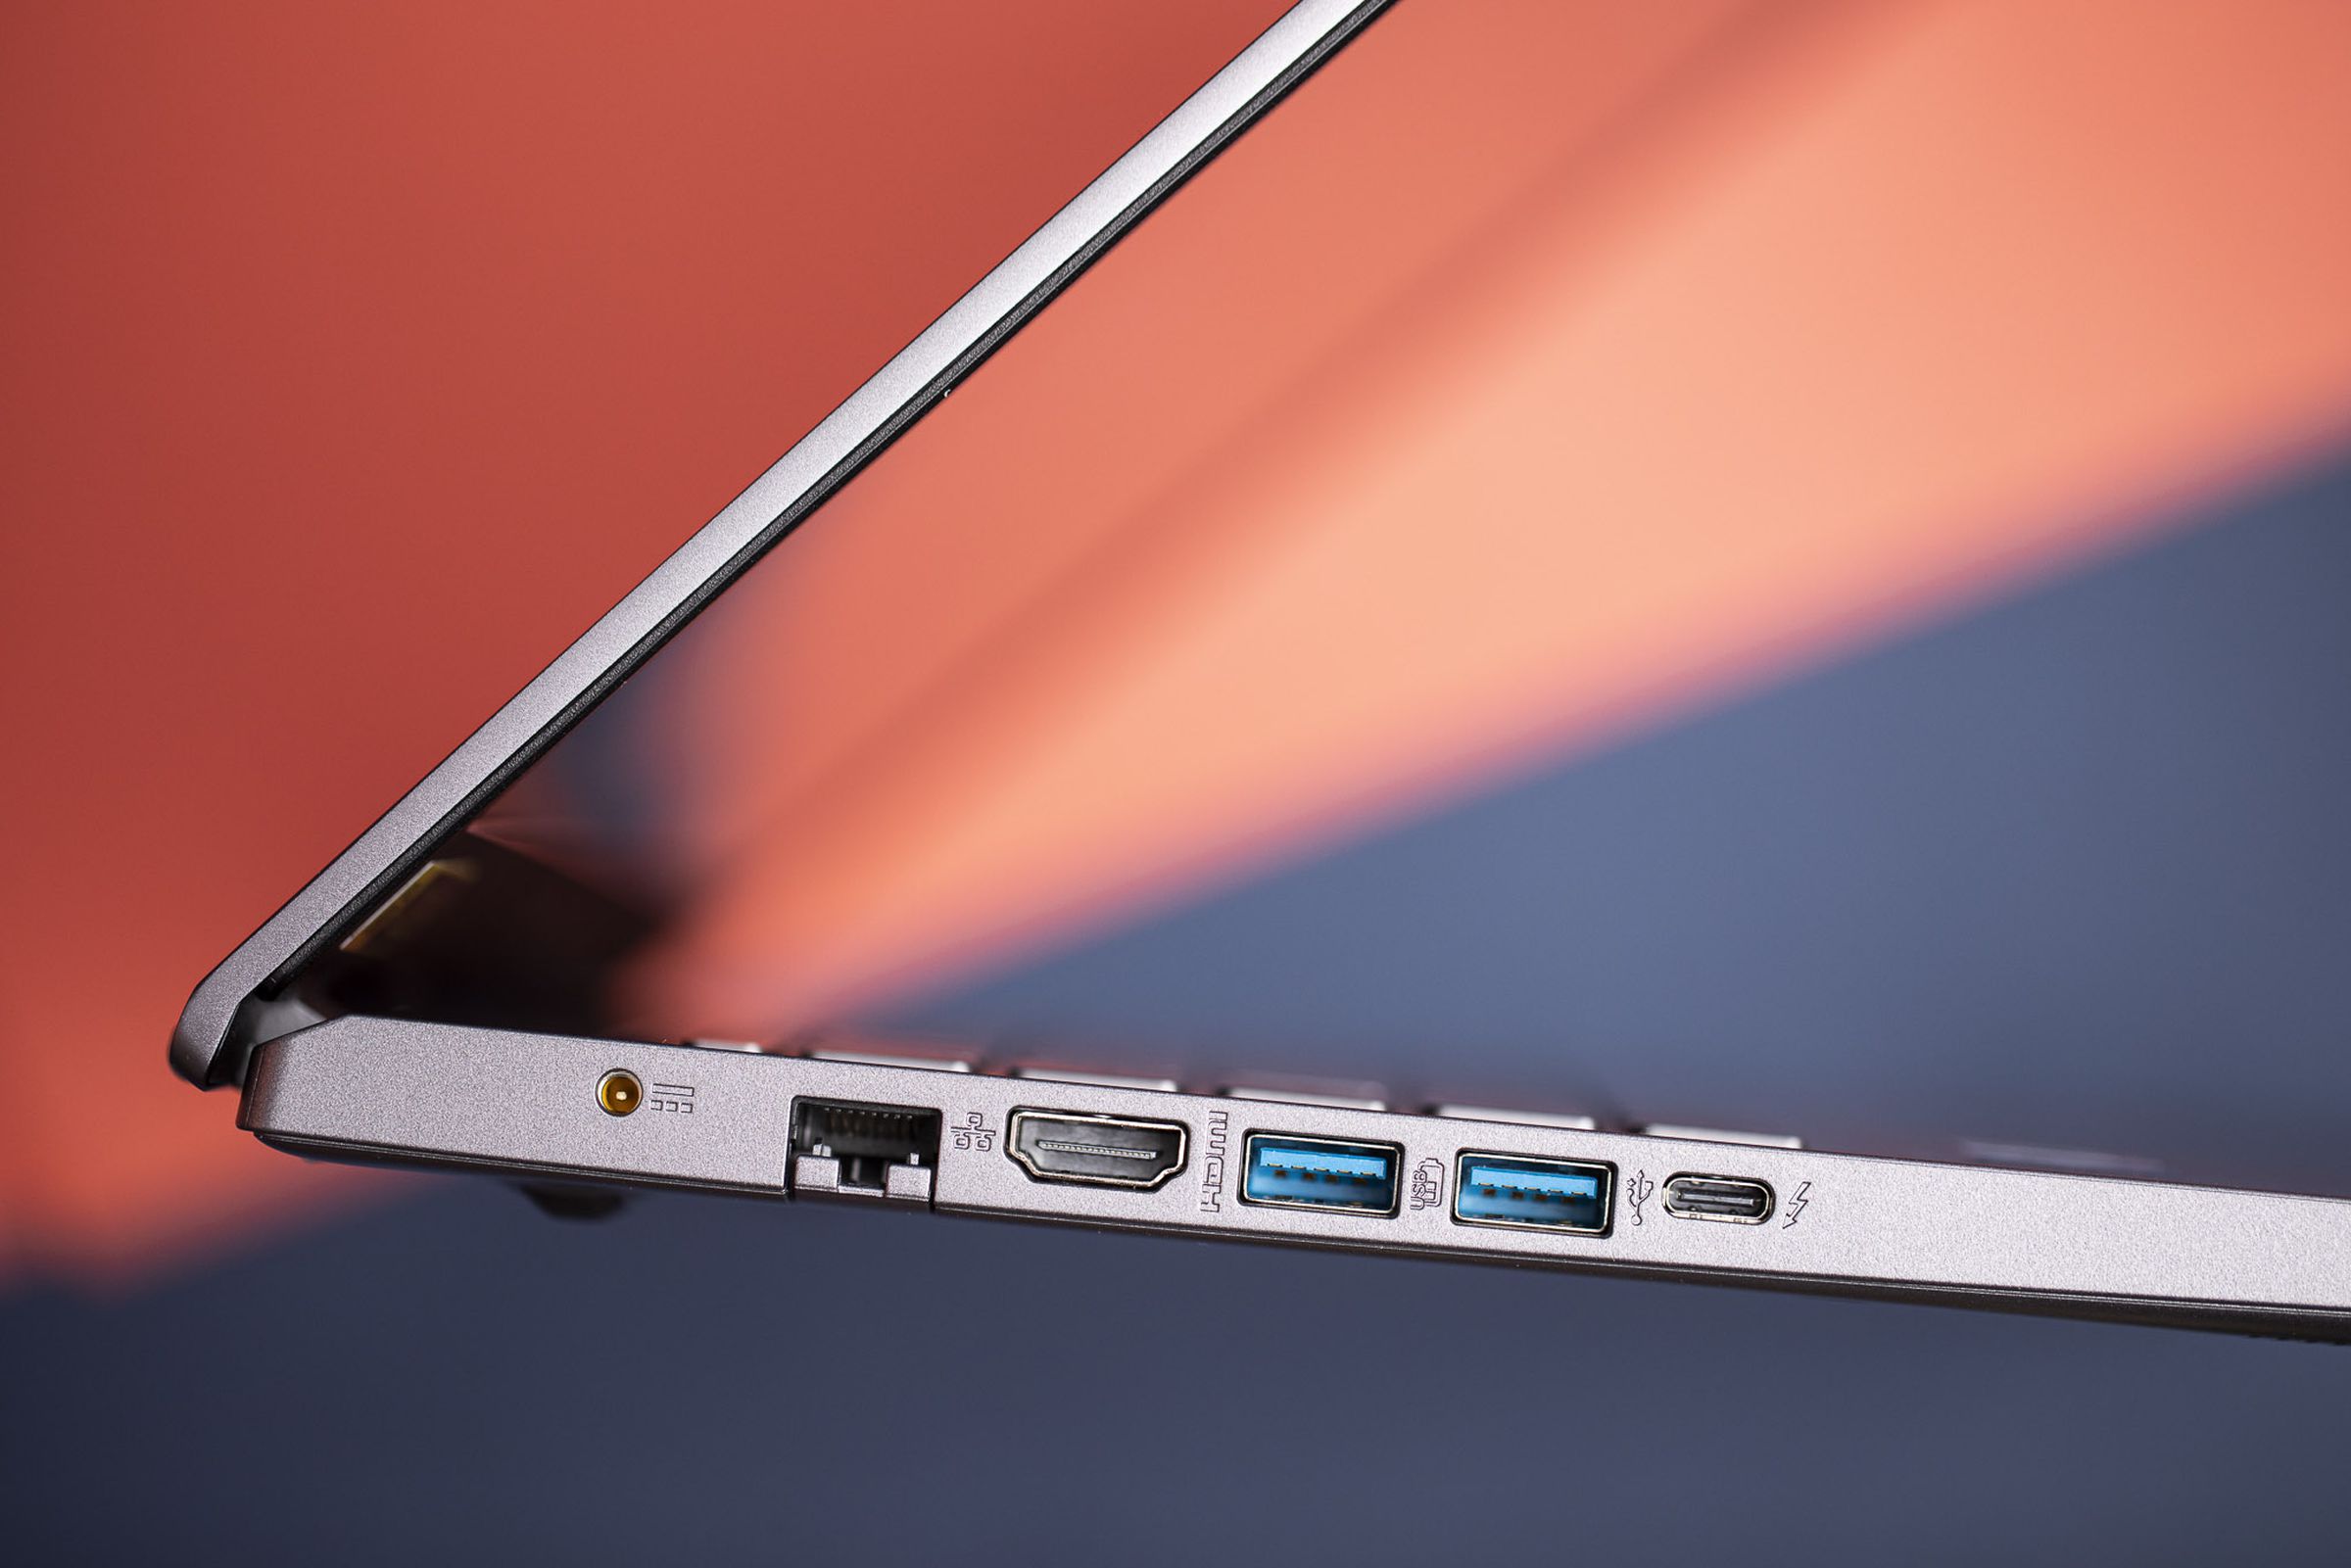 The ports on the left side of the Acer Aspire 5.